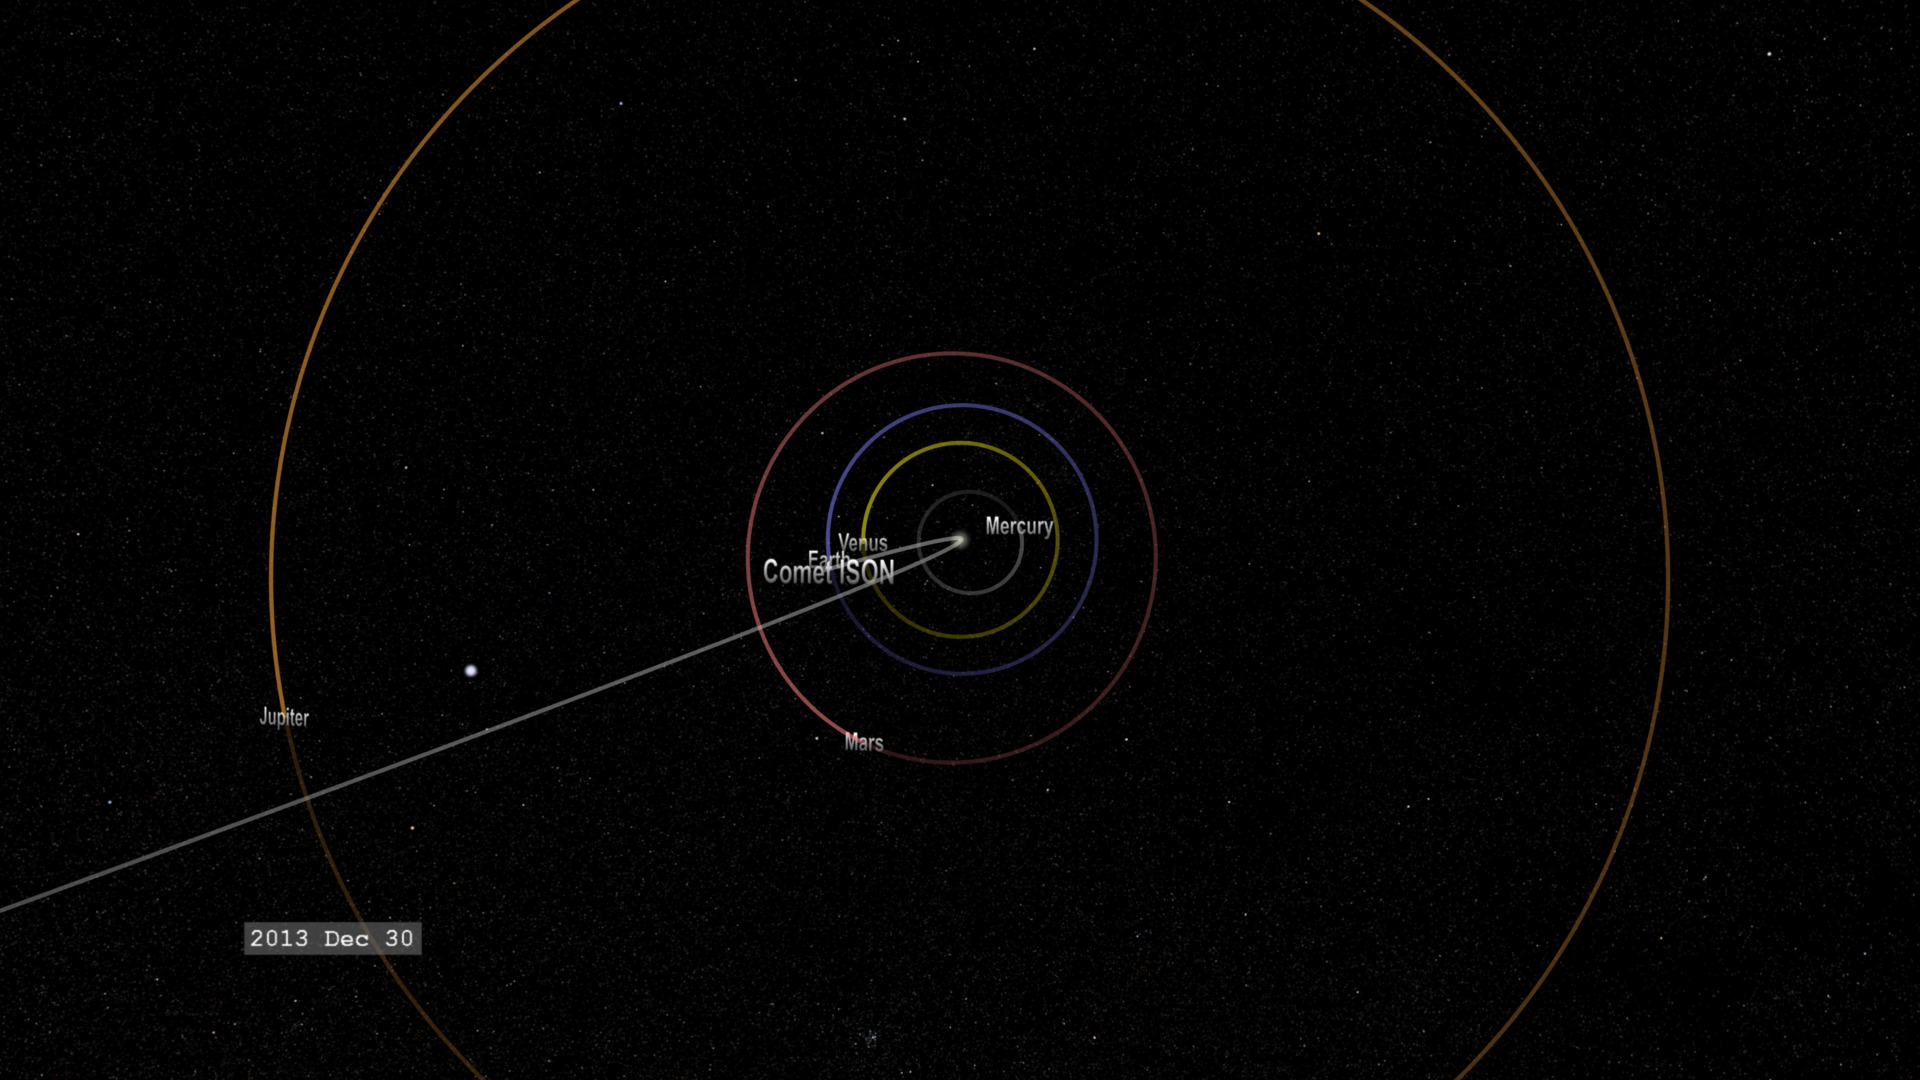 View of Comet ISON approach from above the ecliptic plane.